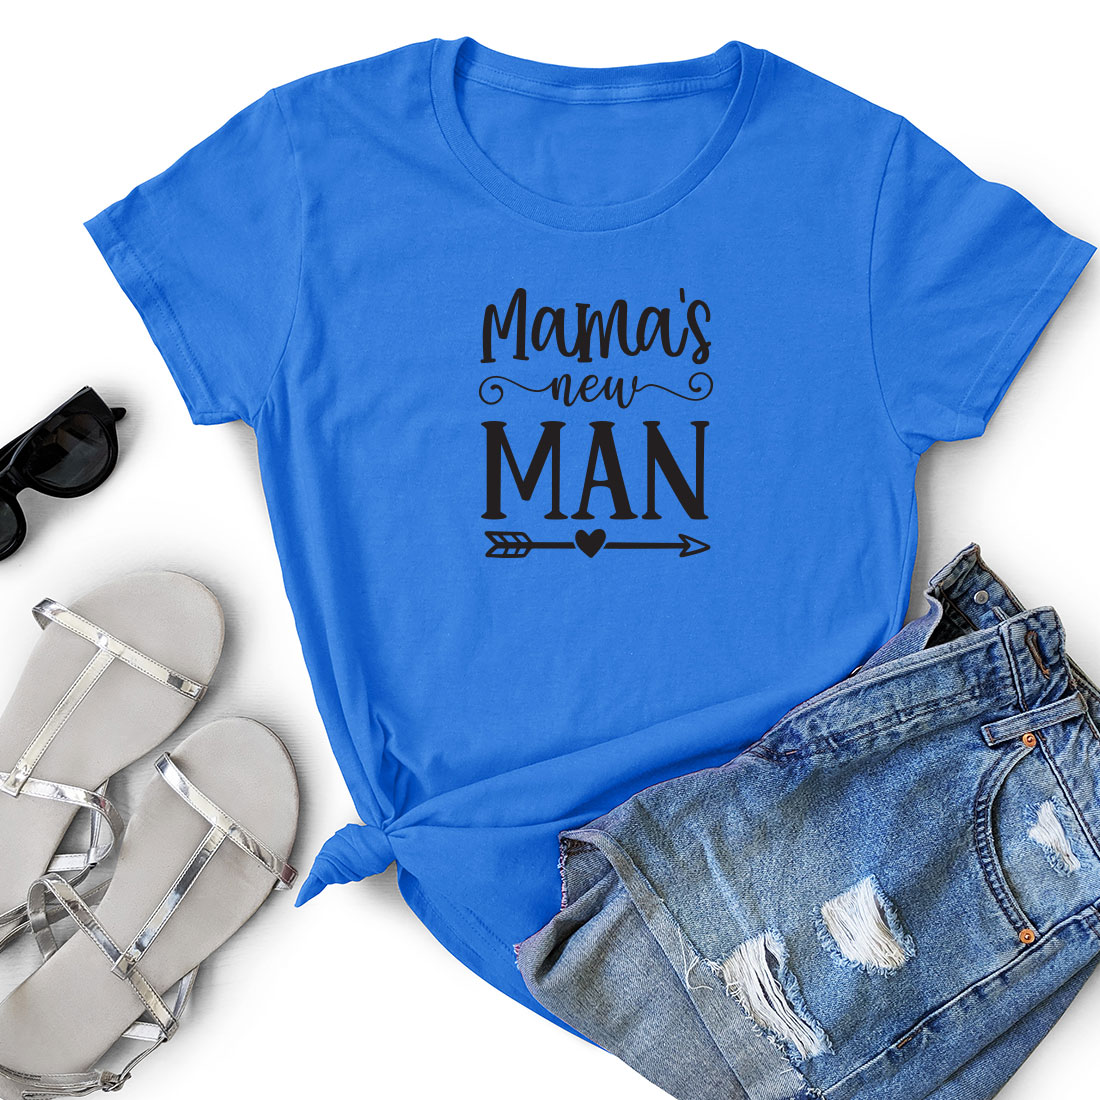 T - shirt that says mama's new man next to a pair of.